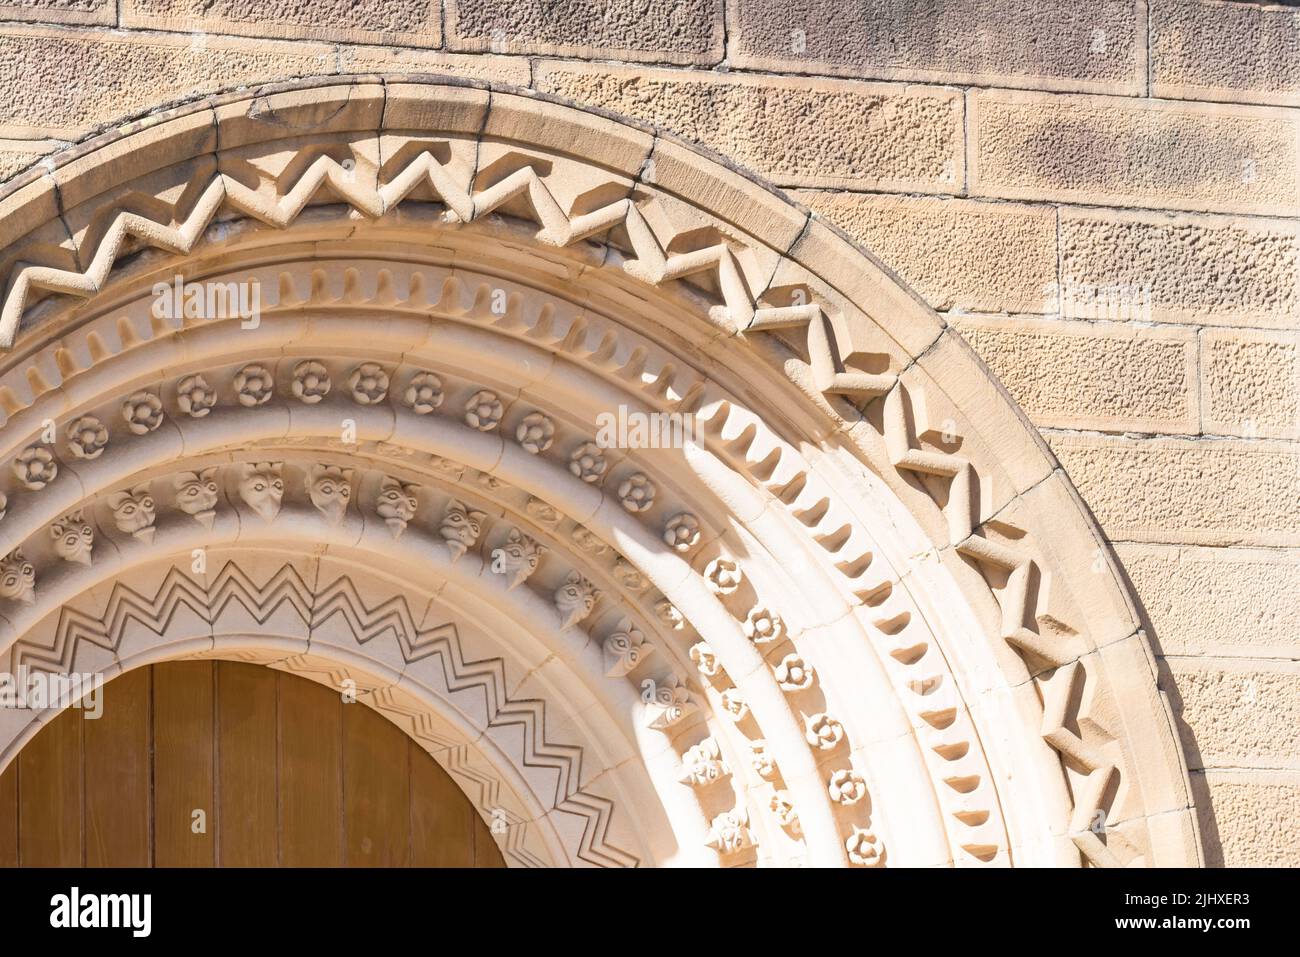 Close-up images of the detailed and complex sandstone carving over the doors and windows of St Johns Anglican cathedral in Parramatta, Australia Stock Photo